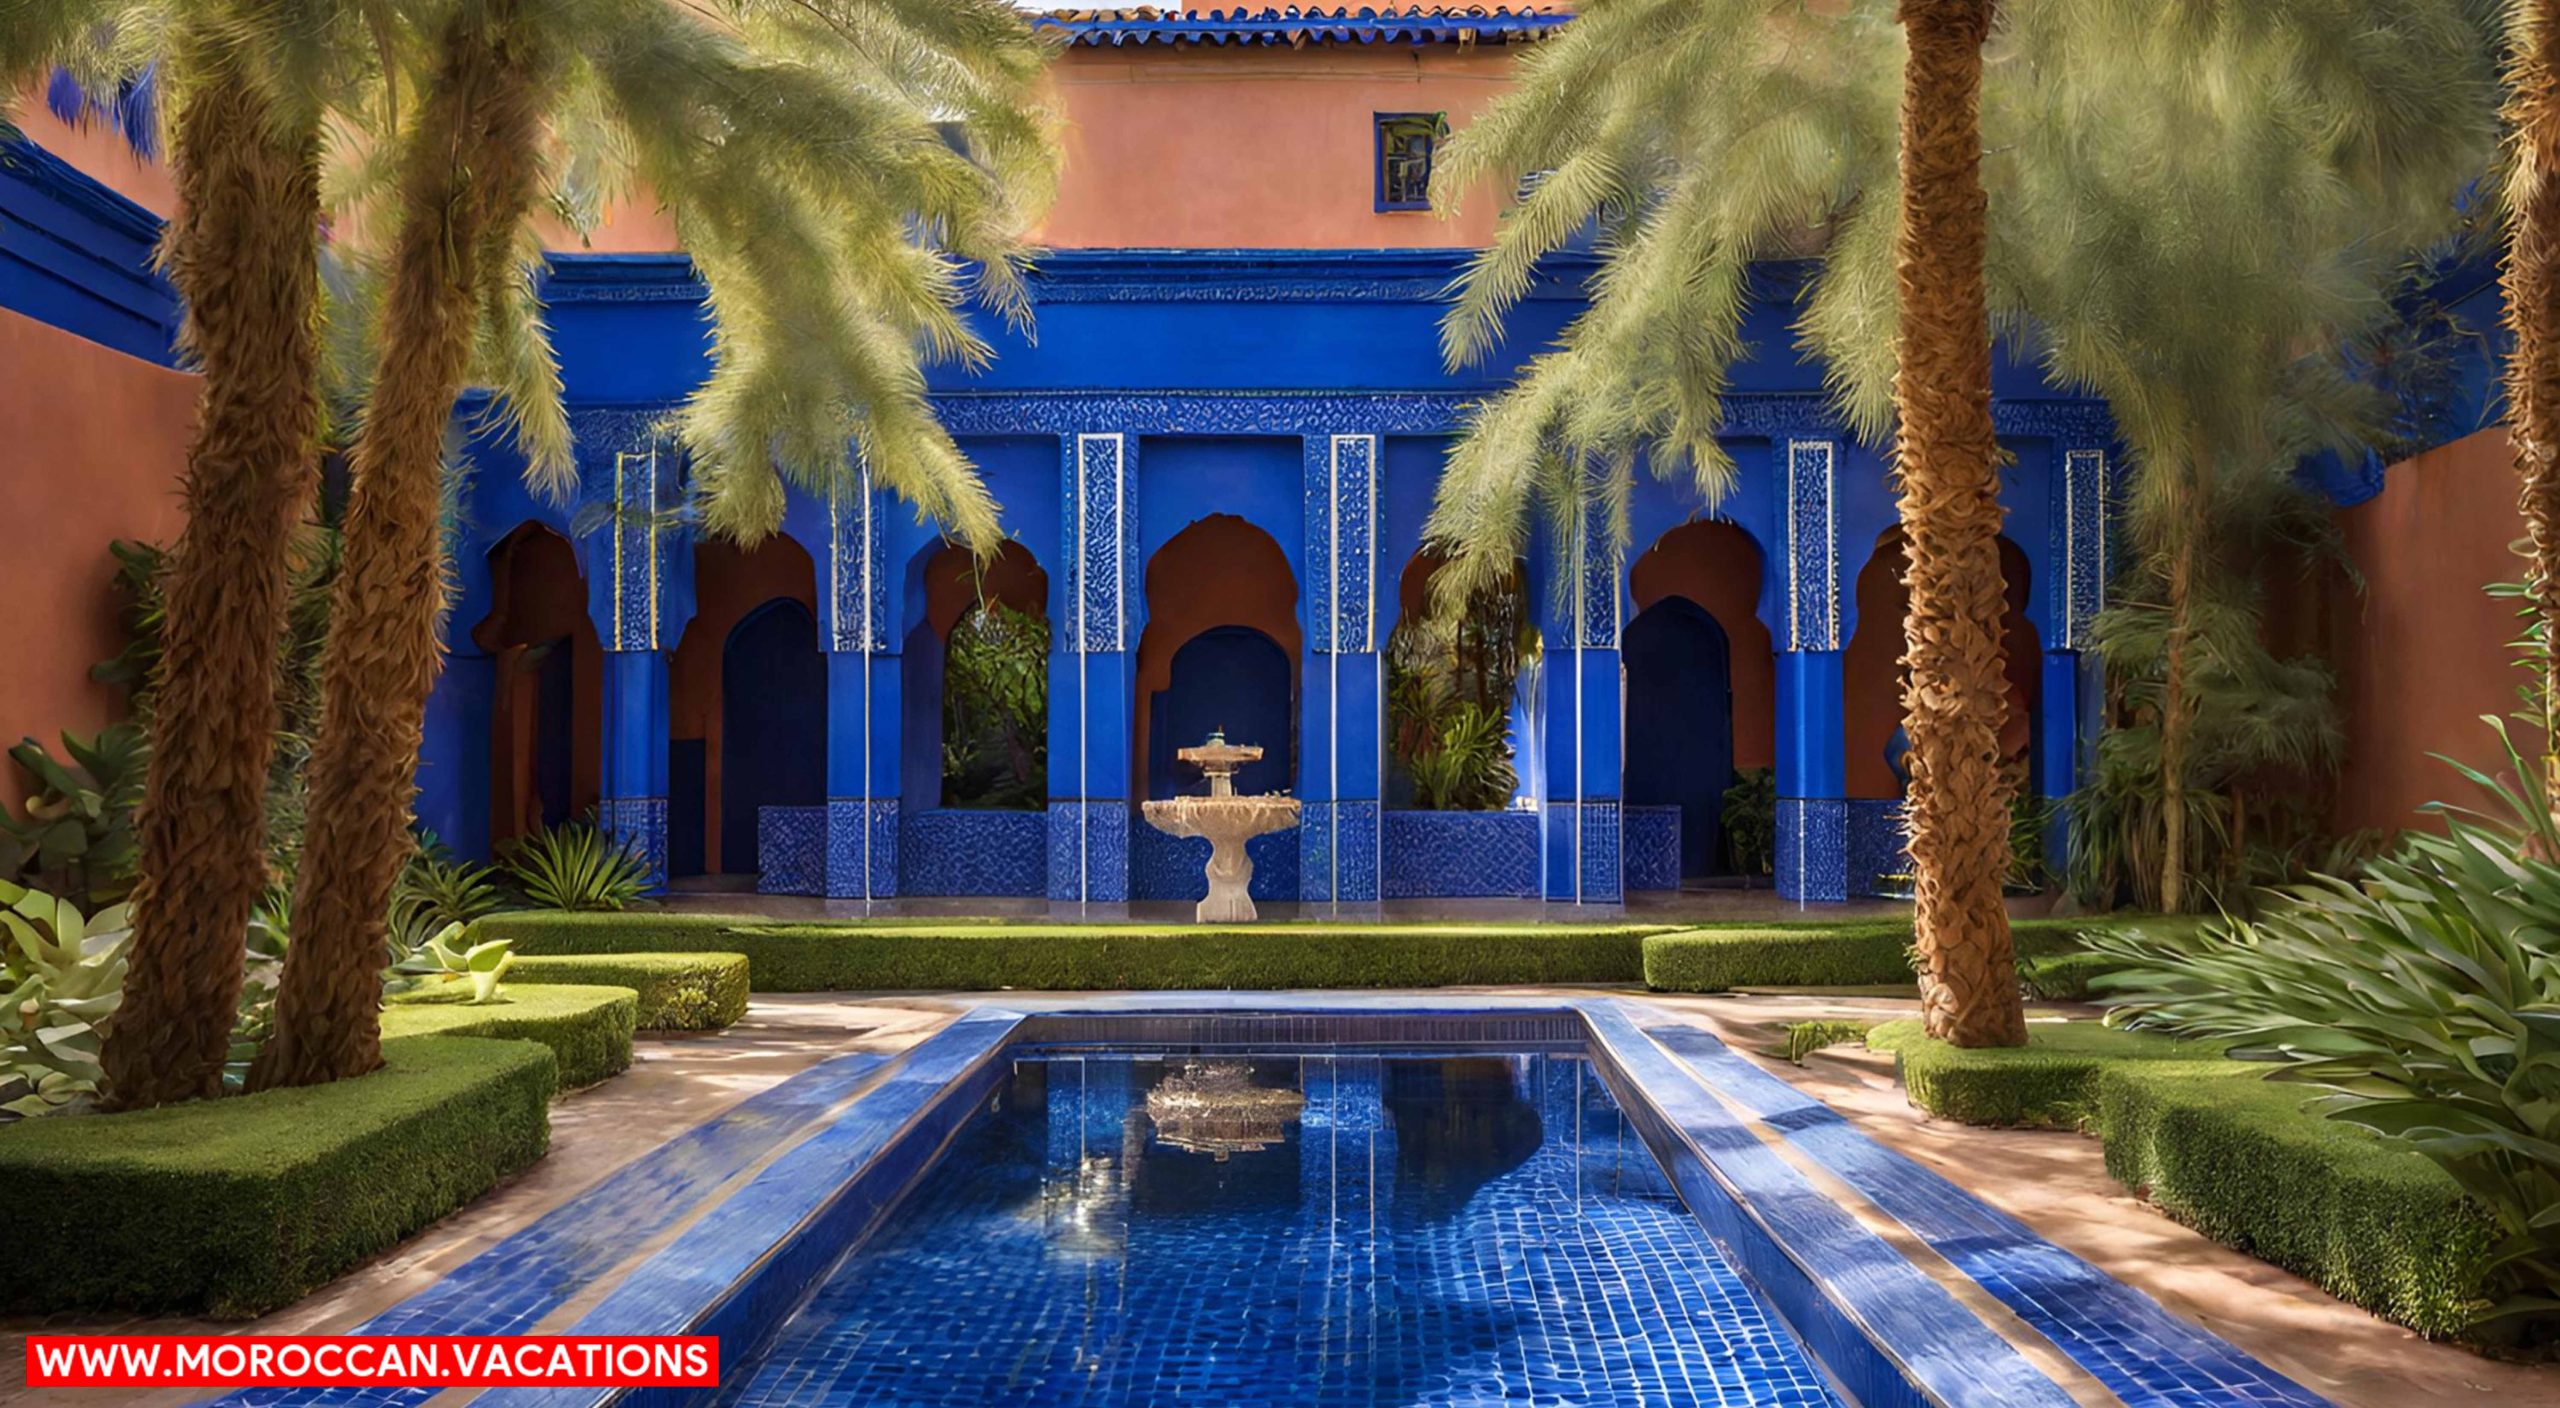 The vibrant blue hues of the iconic tiled fountain, surrounded by lush greenery and delicate water lilies.